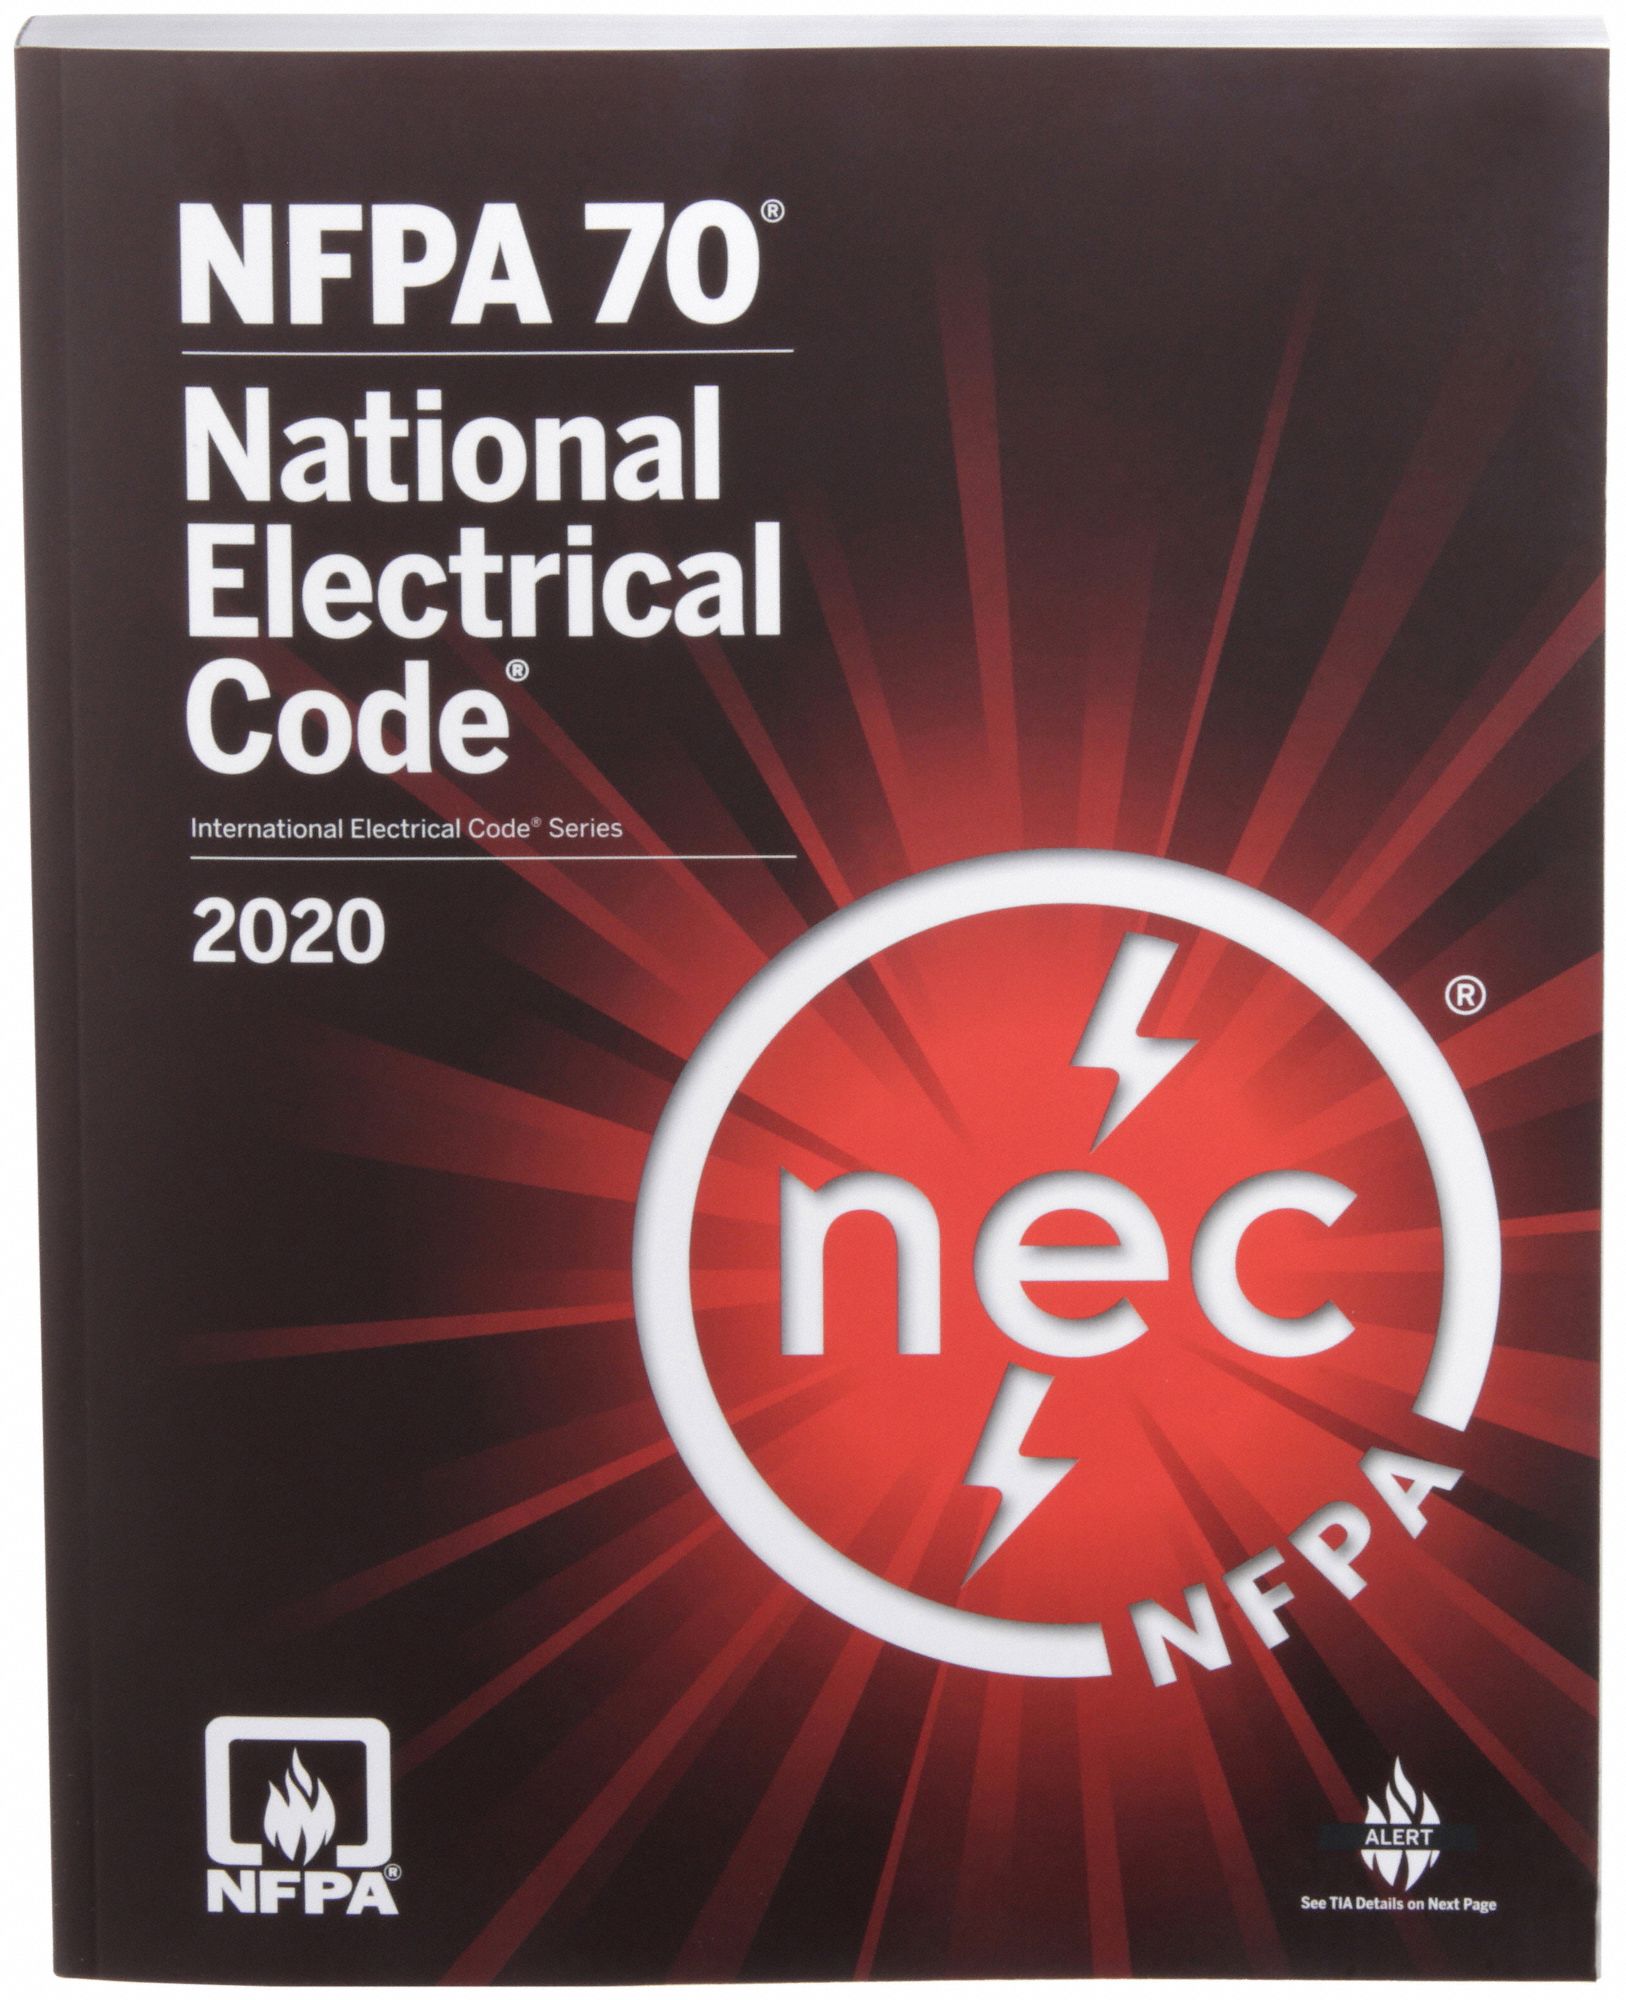 NEC, NFPA 70(R) National Electrical Code, Paperback, Code Book 56JR81